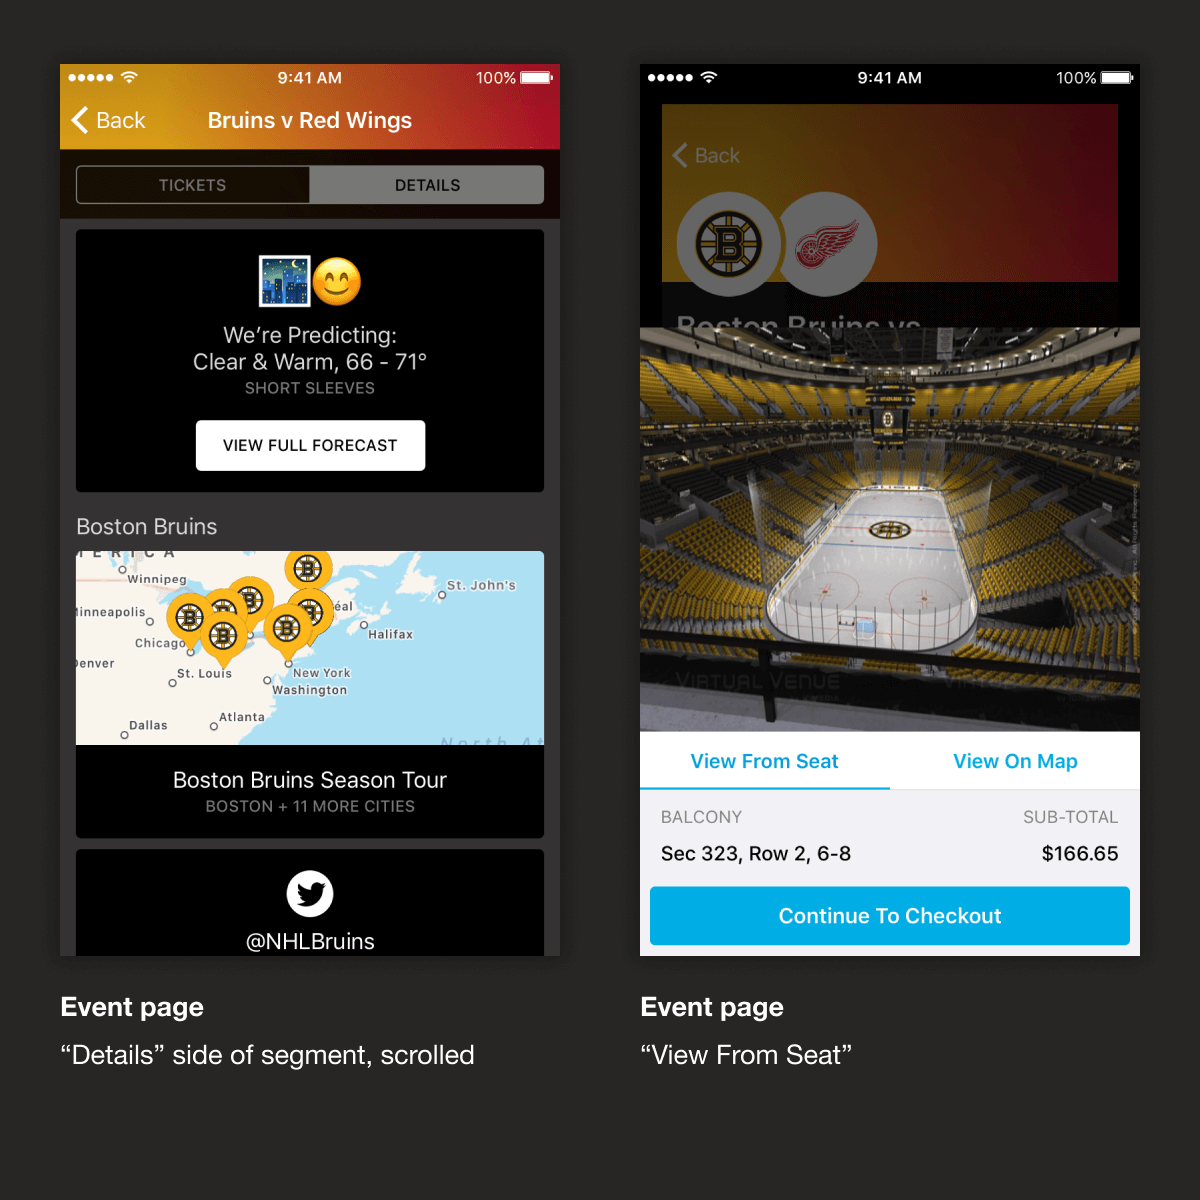 Two additional variations of the event page: the details segment, where team season tours and weather predictions are available, and ‘View From Seat’, showing what the vantage point for that ticket would be